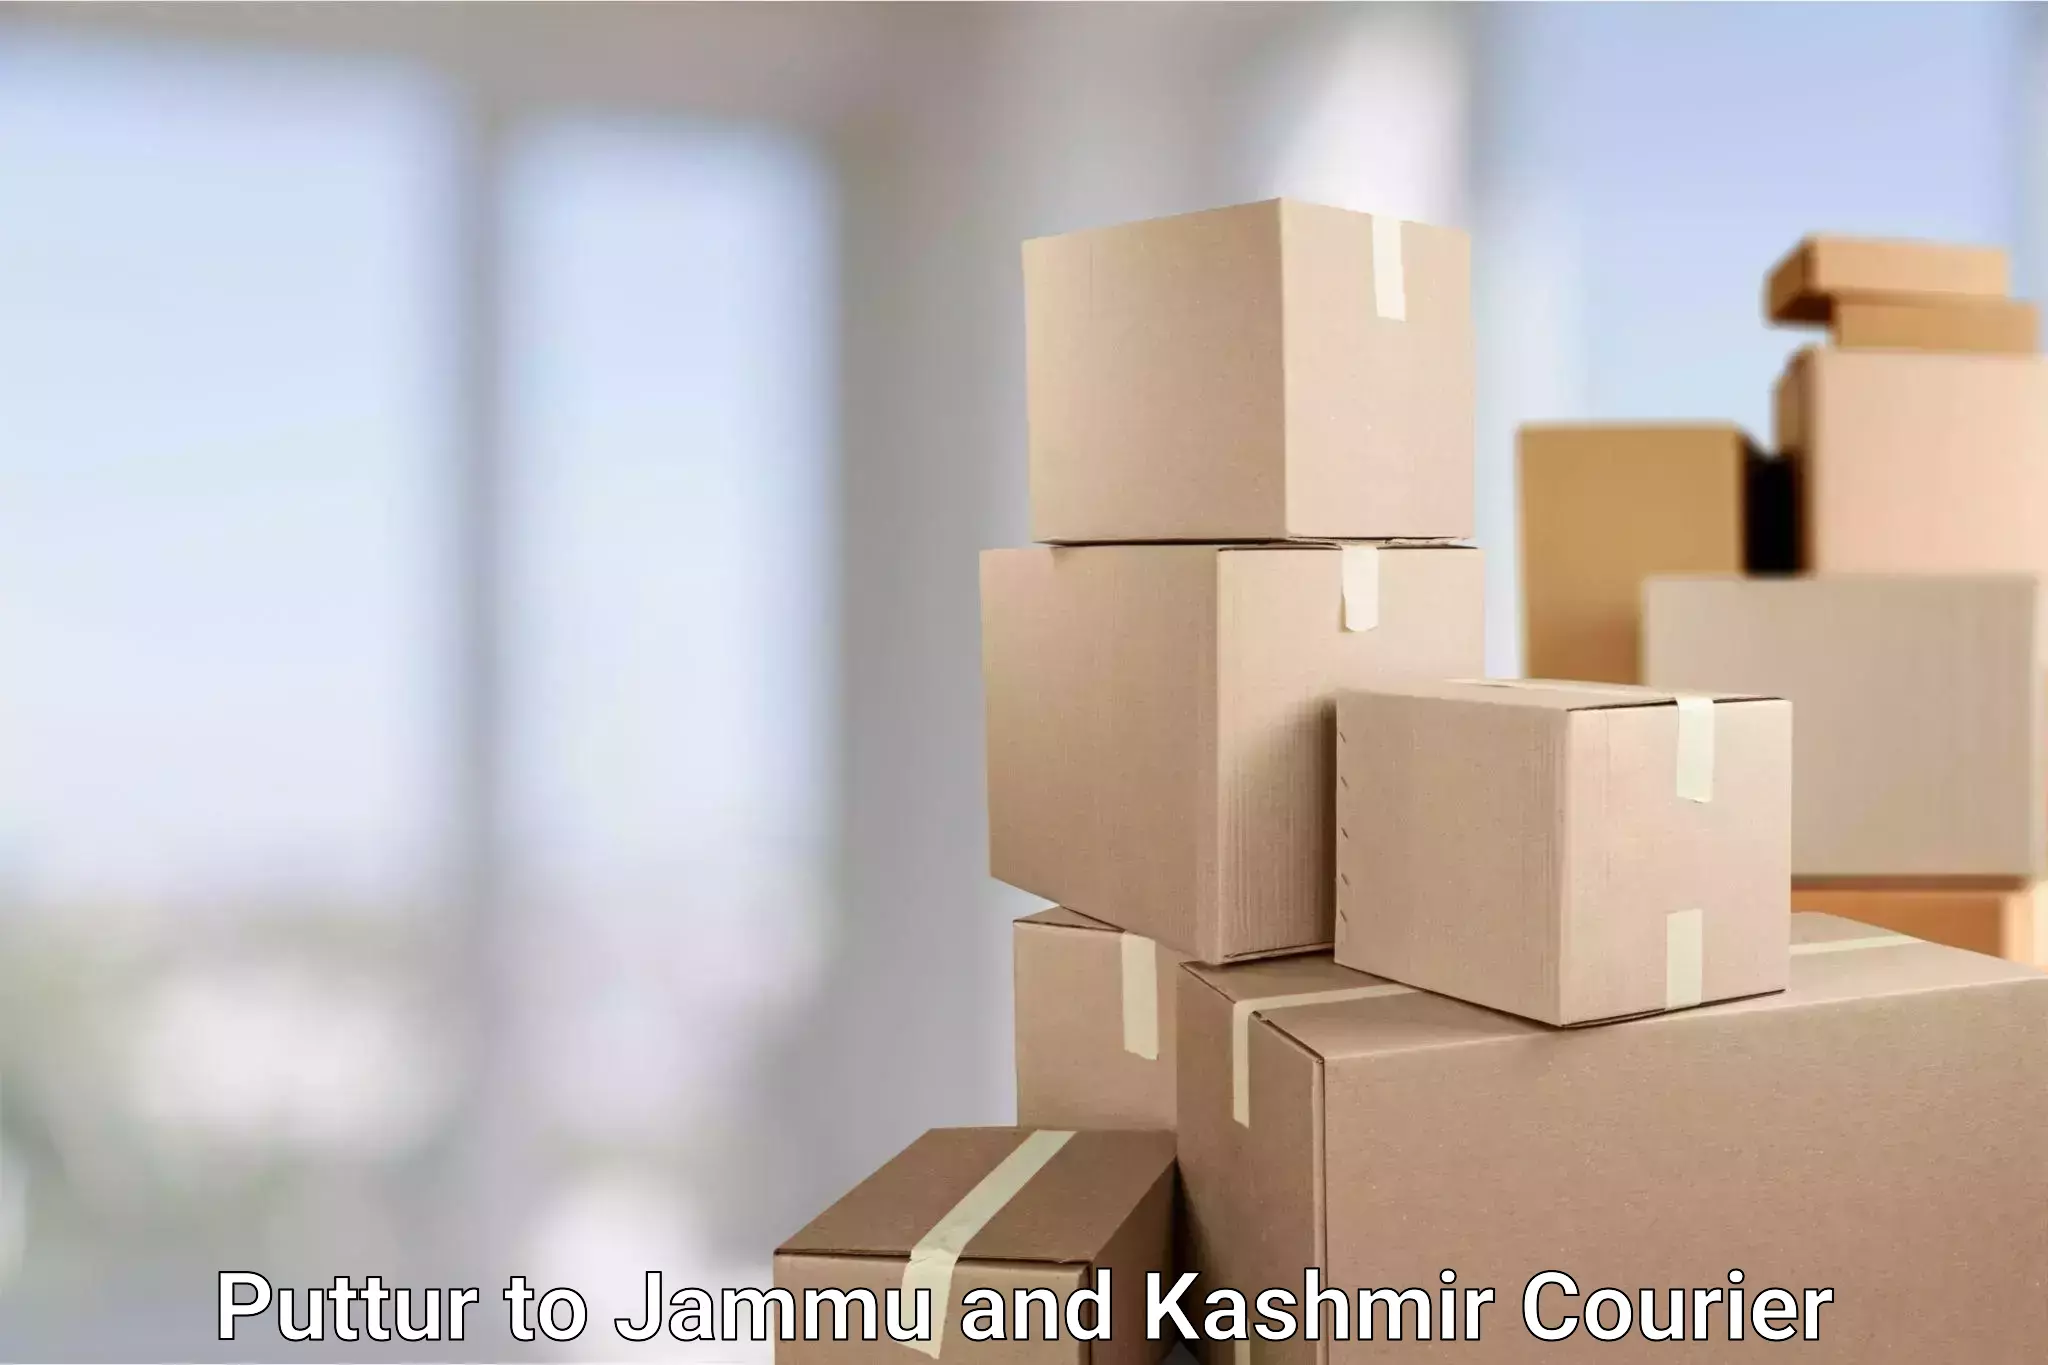 Global courier networks Puttur to Udhampur